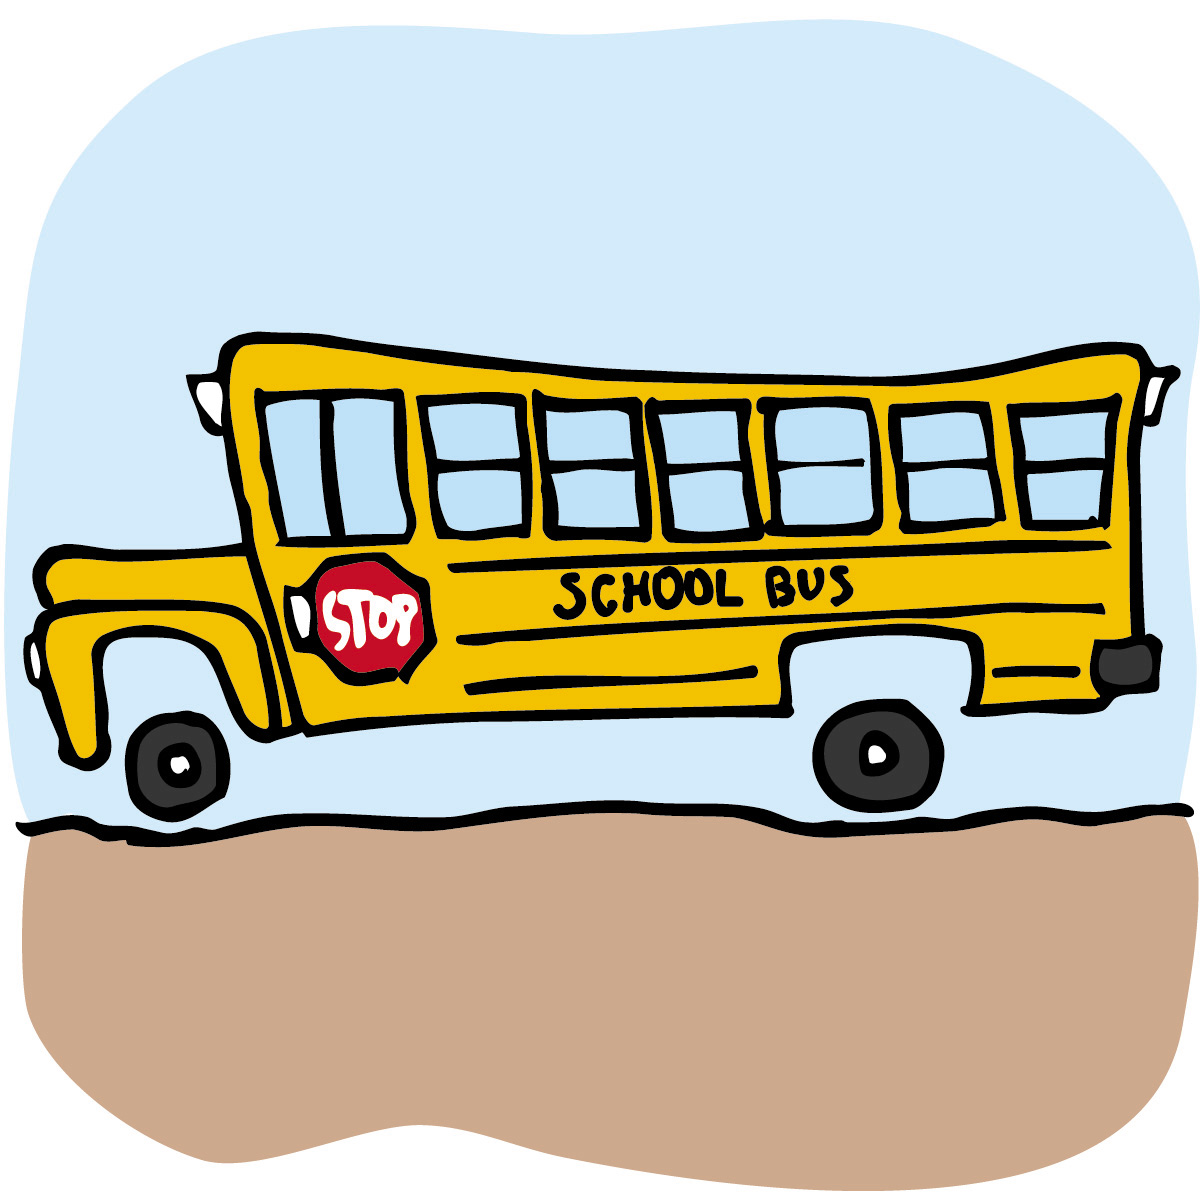 moving bus clipart - photo #20